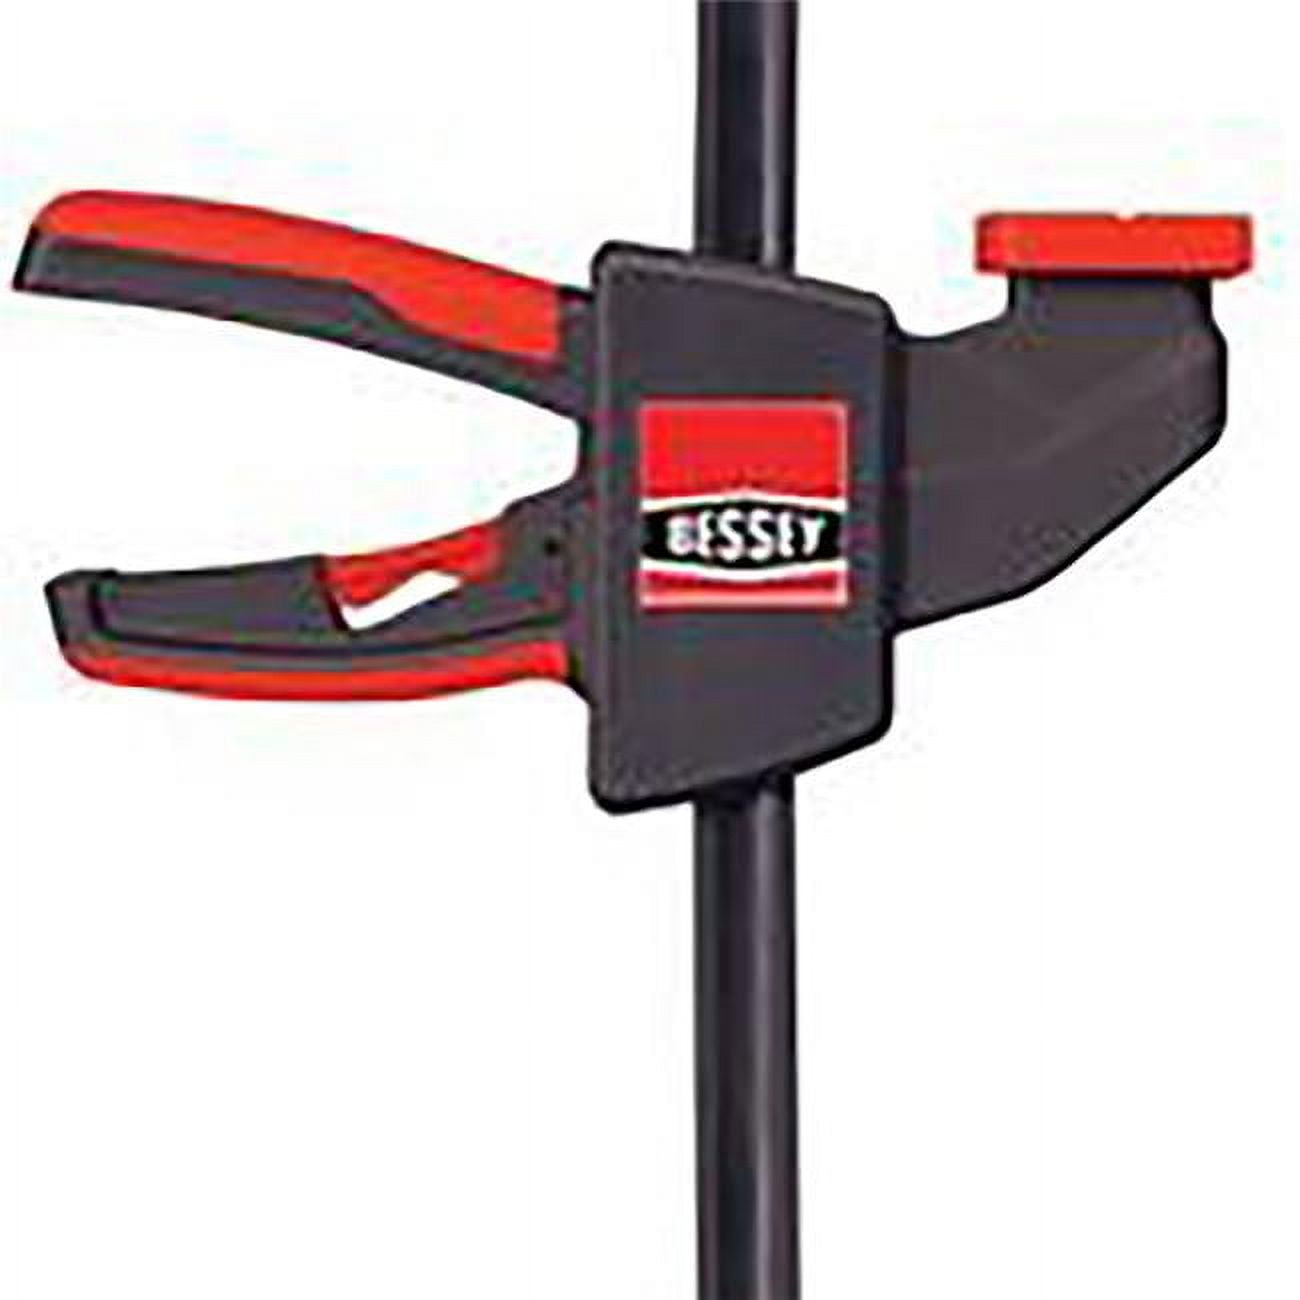 Picture of Bessey 2007080 12 x 2.375 in. 100 lbs EHK Trigger Clamp